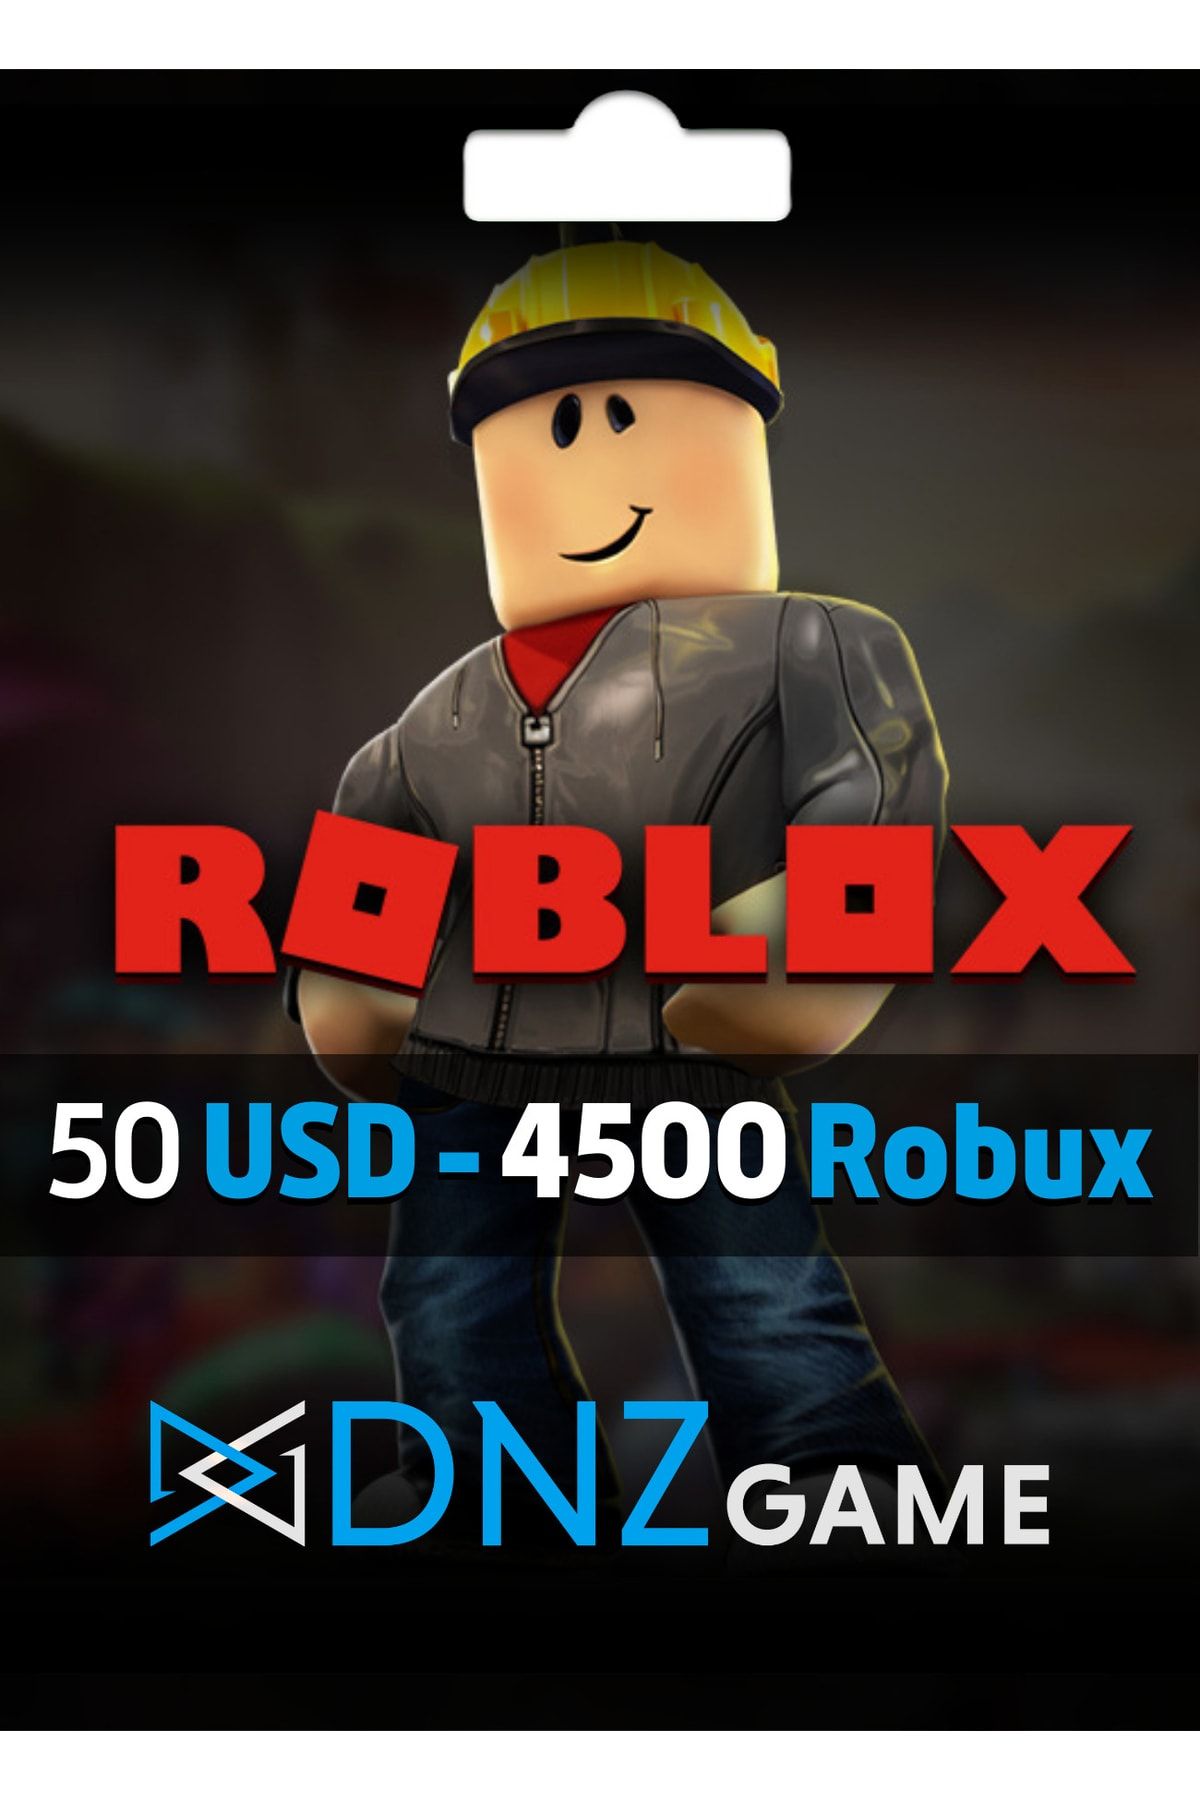 Roblox Gift Card 50 Usd 4500 Robux